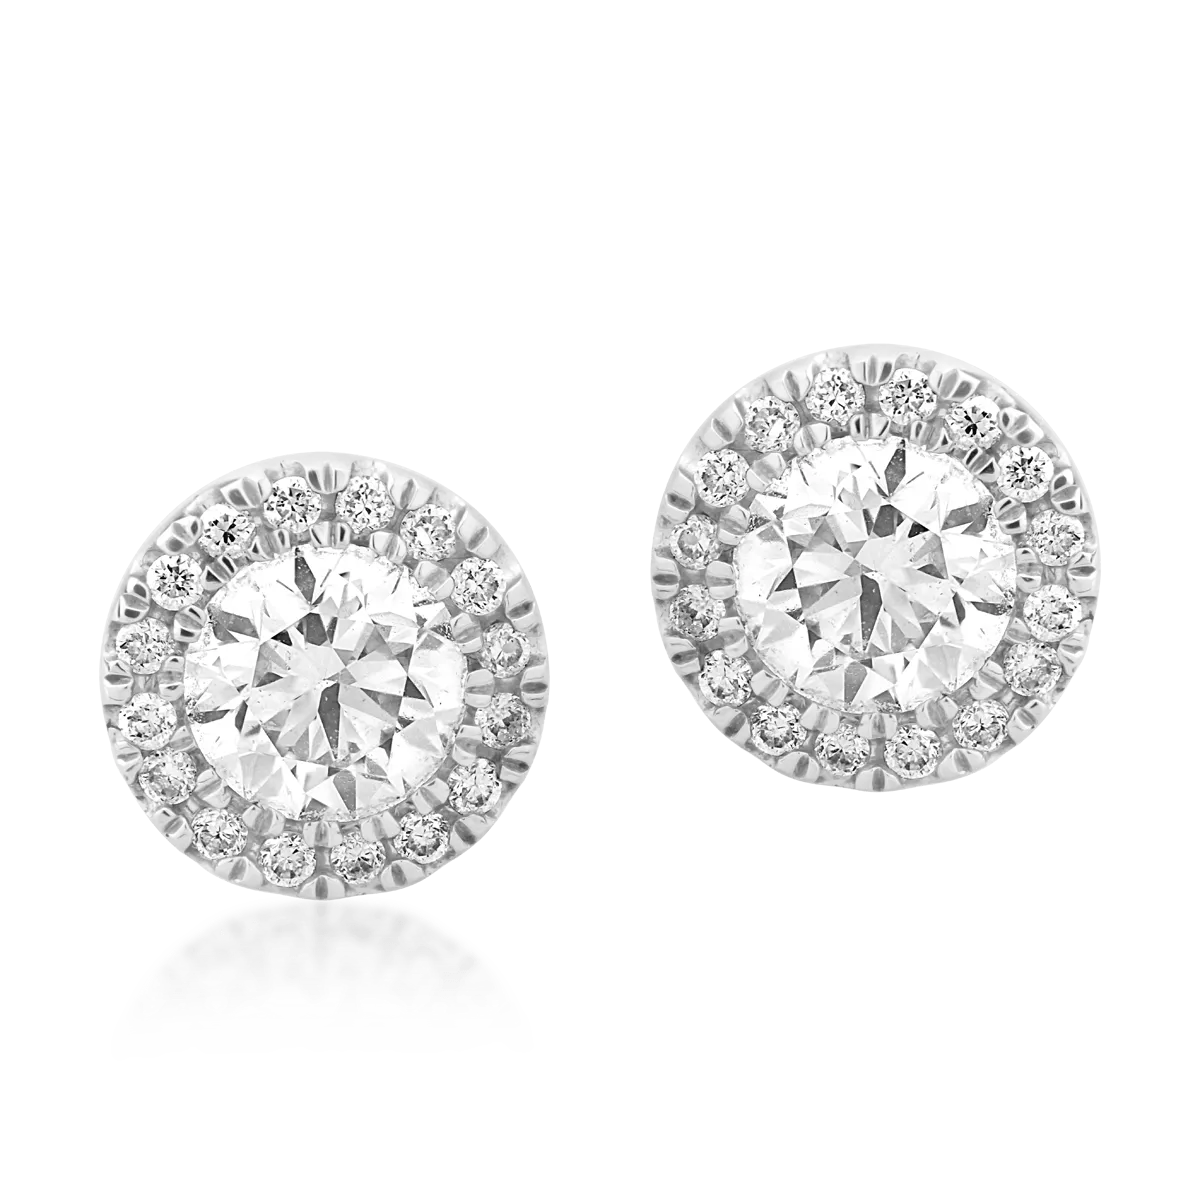 18K white gold earrings with 0.7ct diamonds